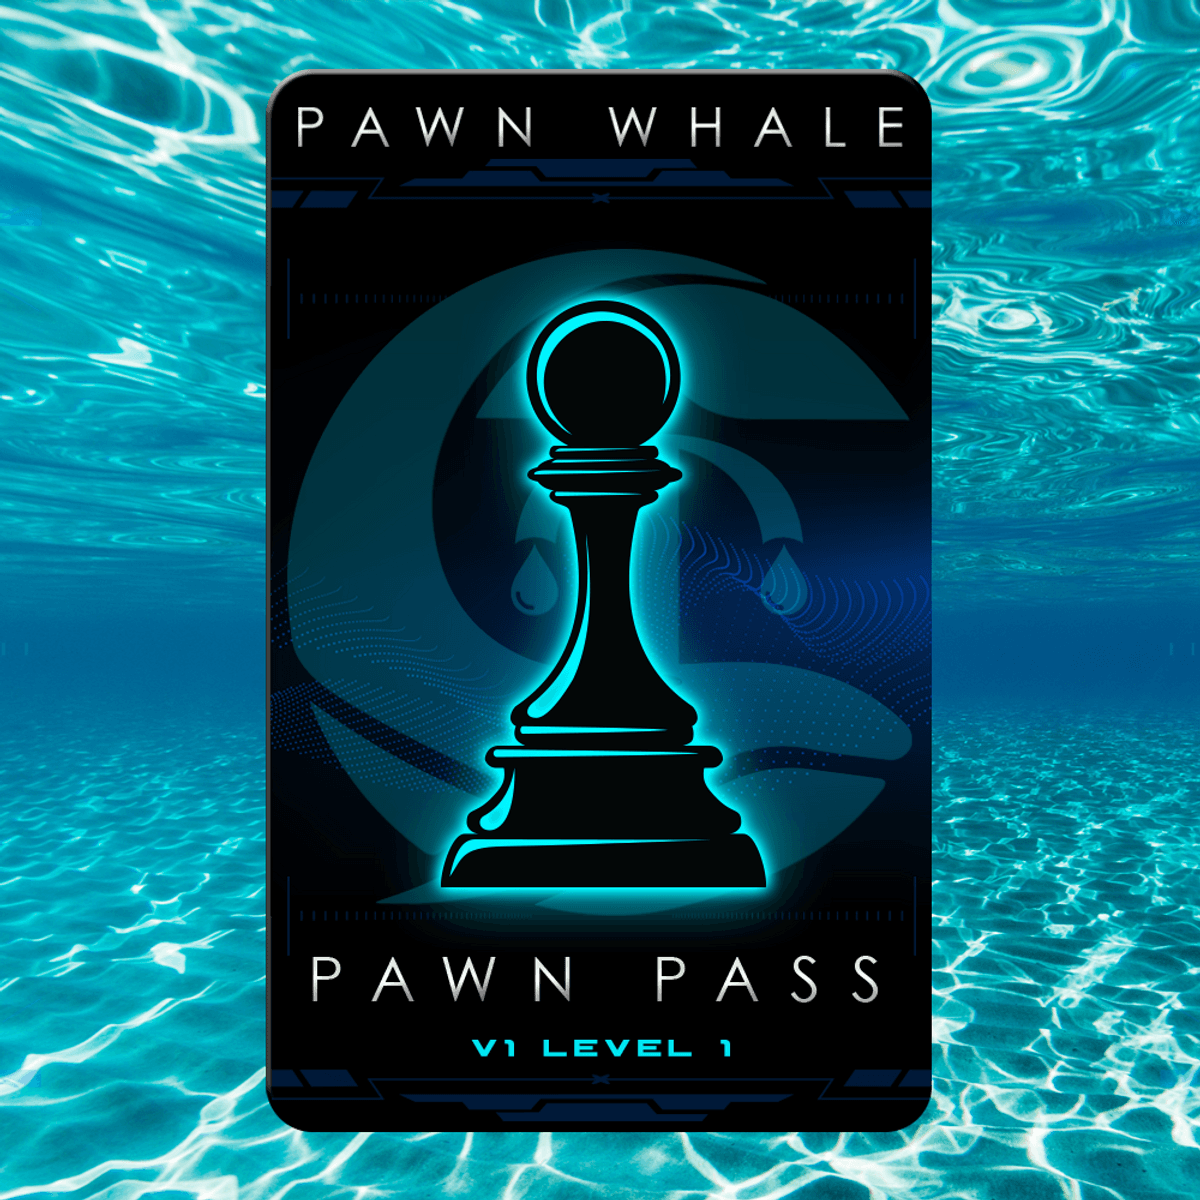 Pawn Whale Pass #2280